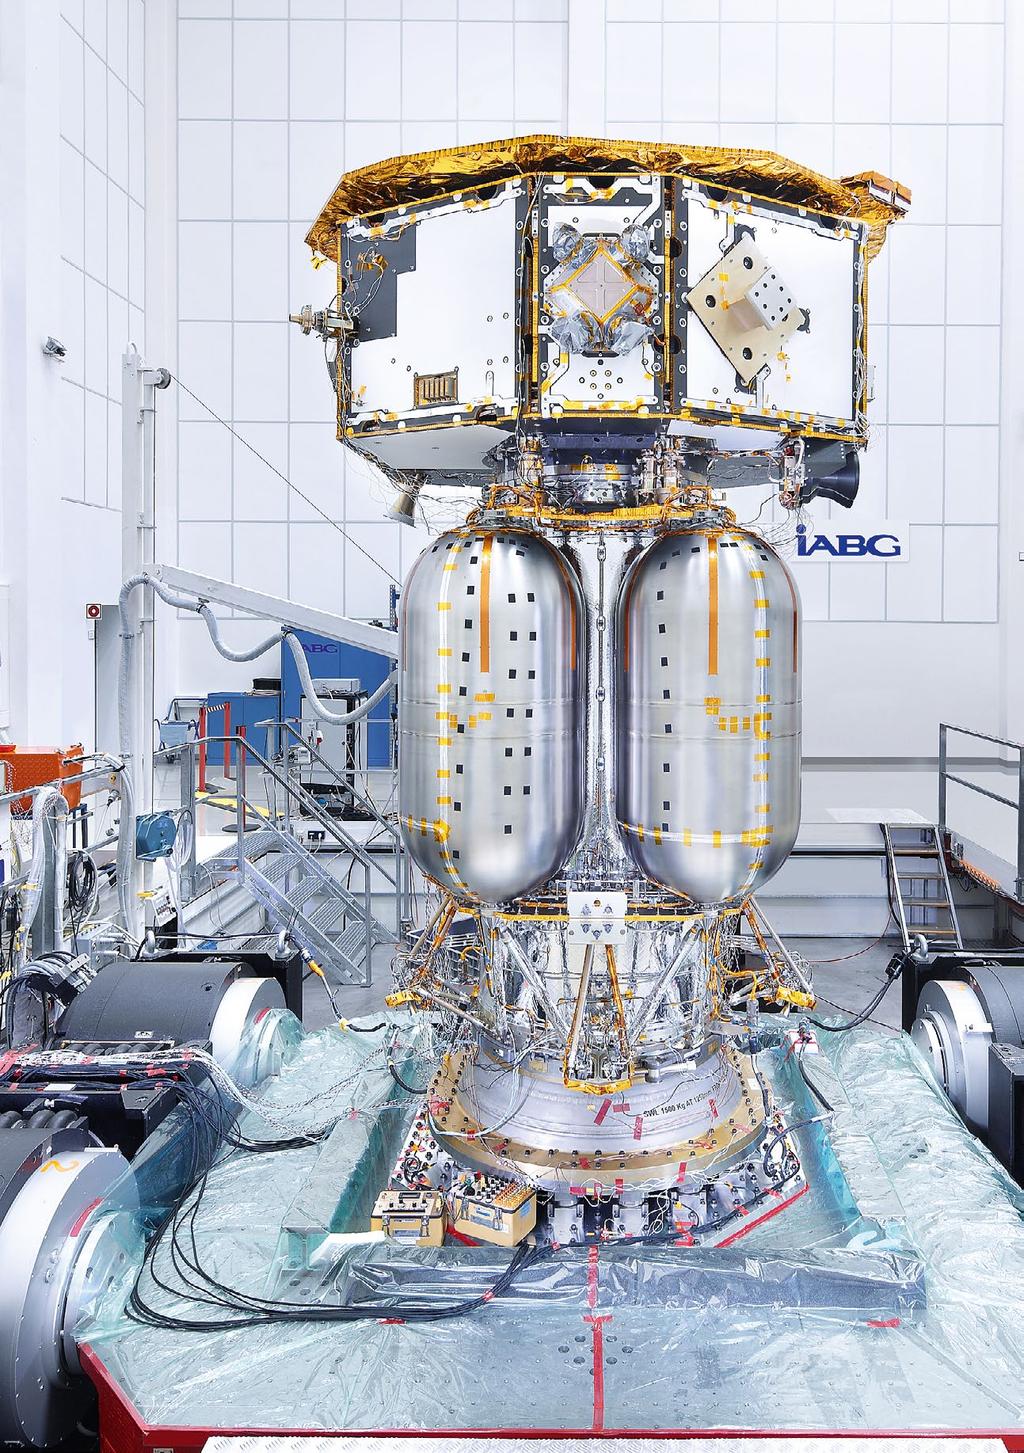 Mechanical tests Ensuring safety comes first LISA Pathfinder LCM satellite on 320 kn